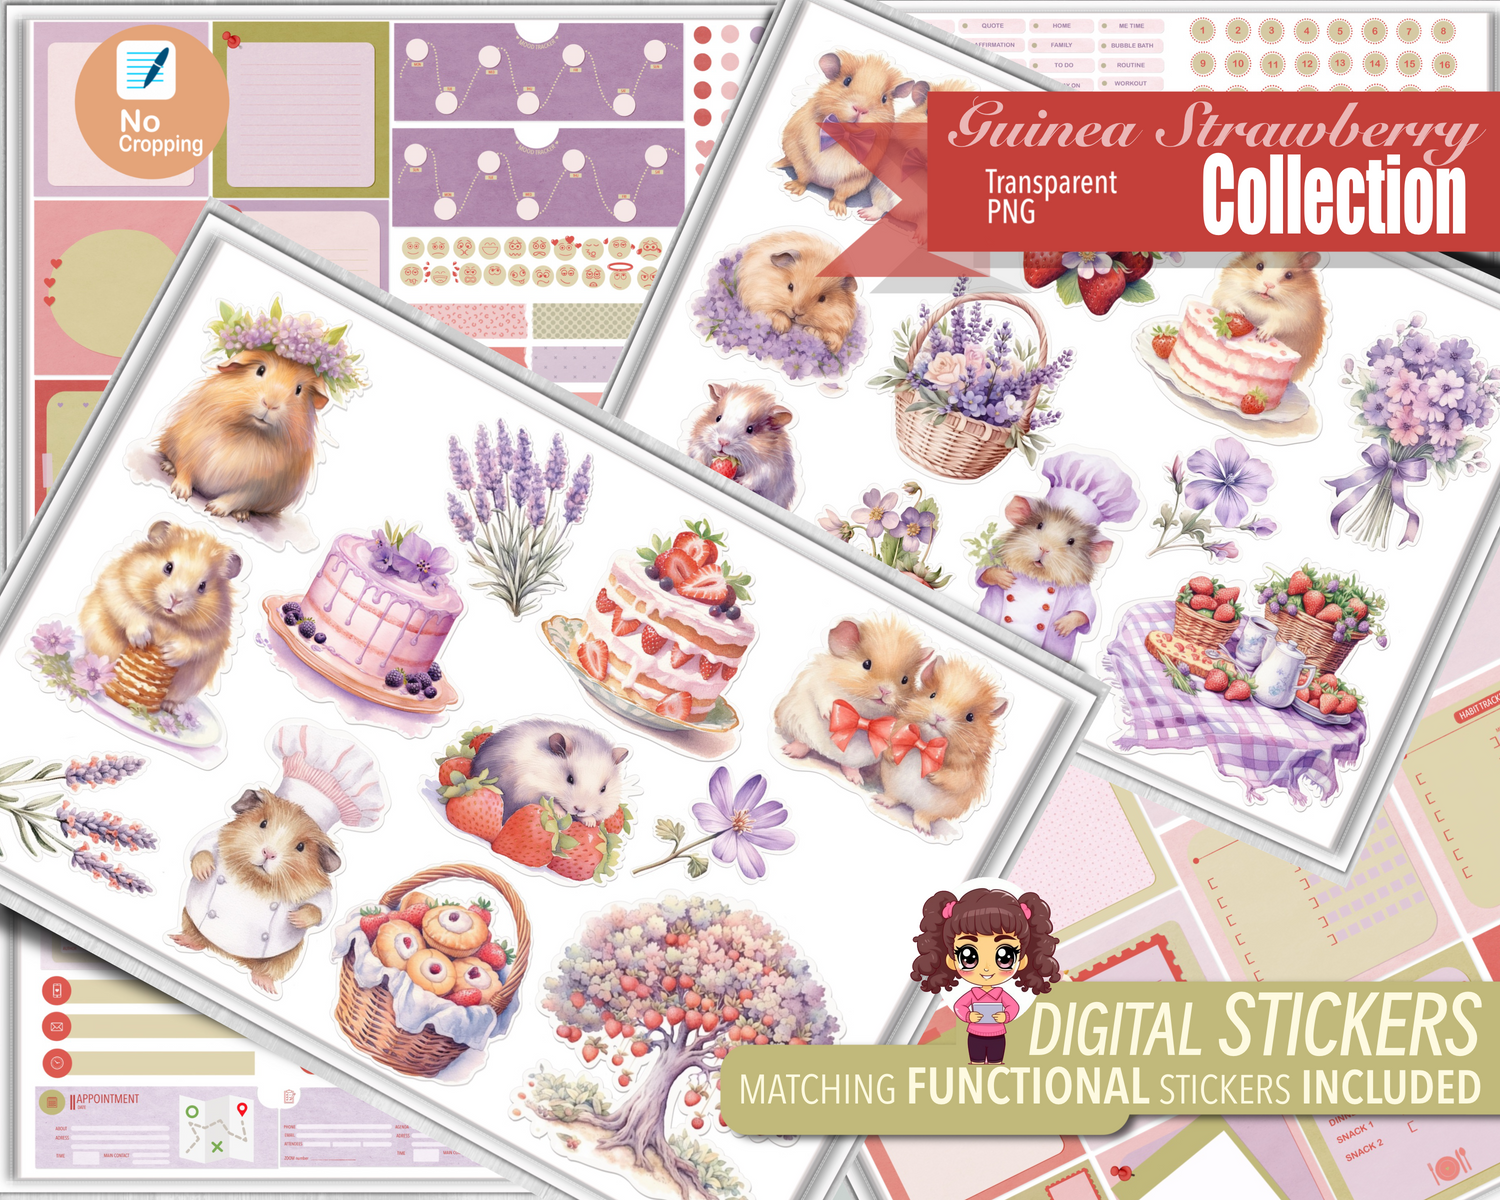 Digital Stickers For Goodnotes And Android, Guinea Strawberry Collection